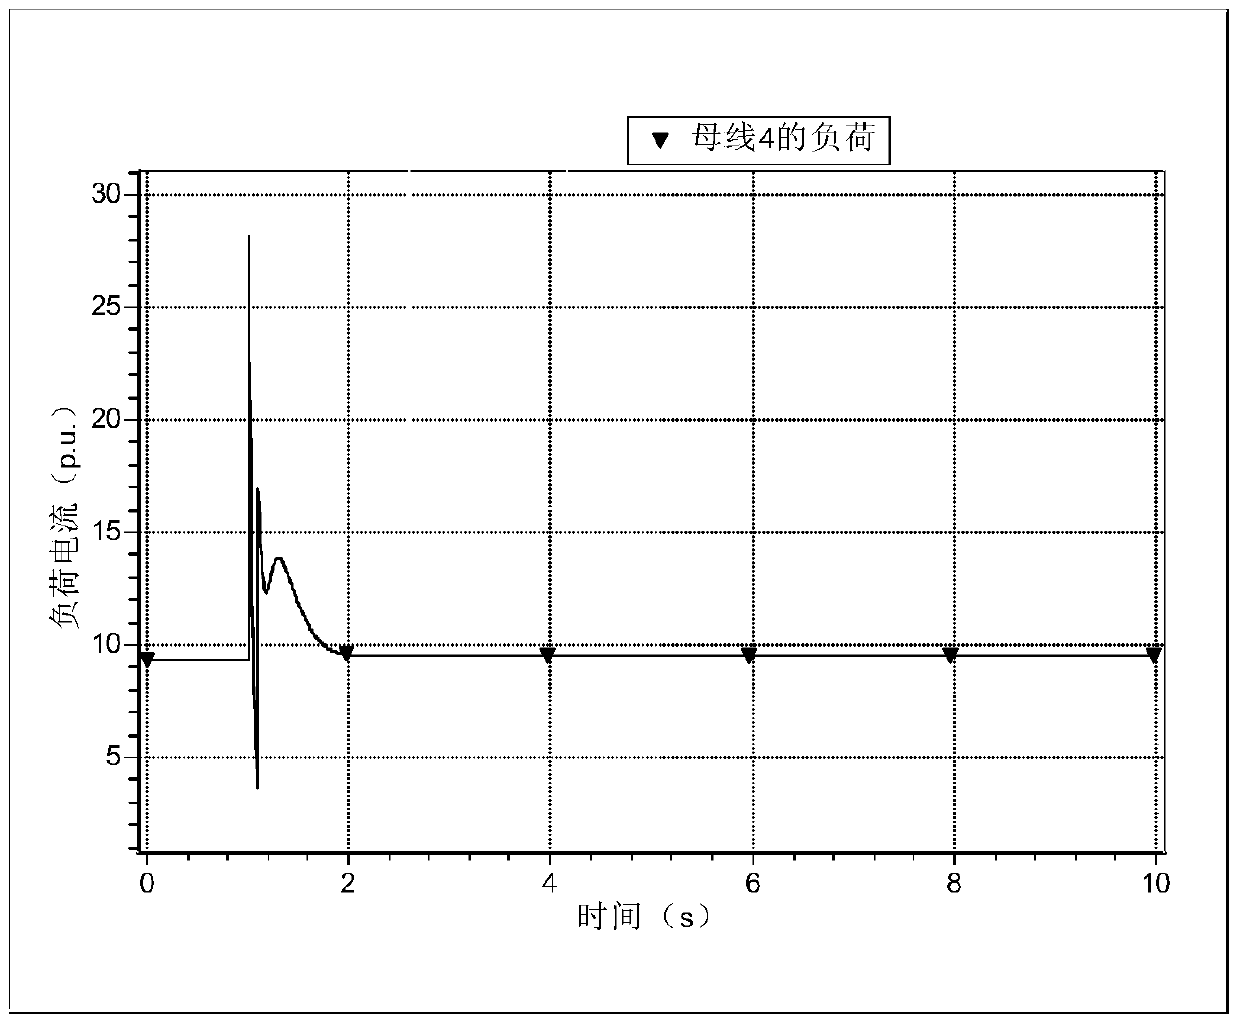 A Quantitative Evaluation Method of Transient Voltage Stability Based on Equivalent Impedance of Critical System